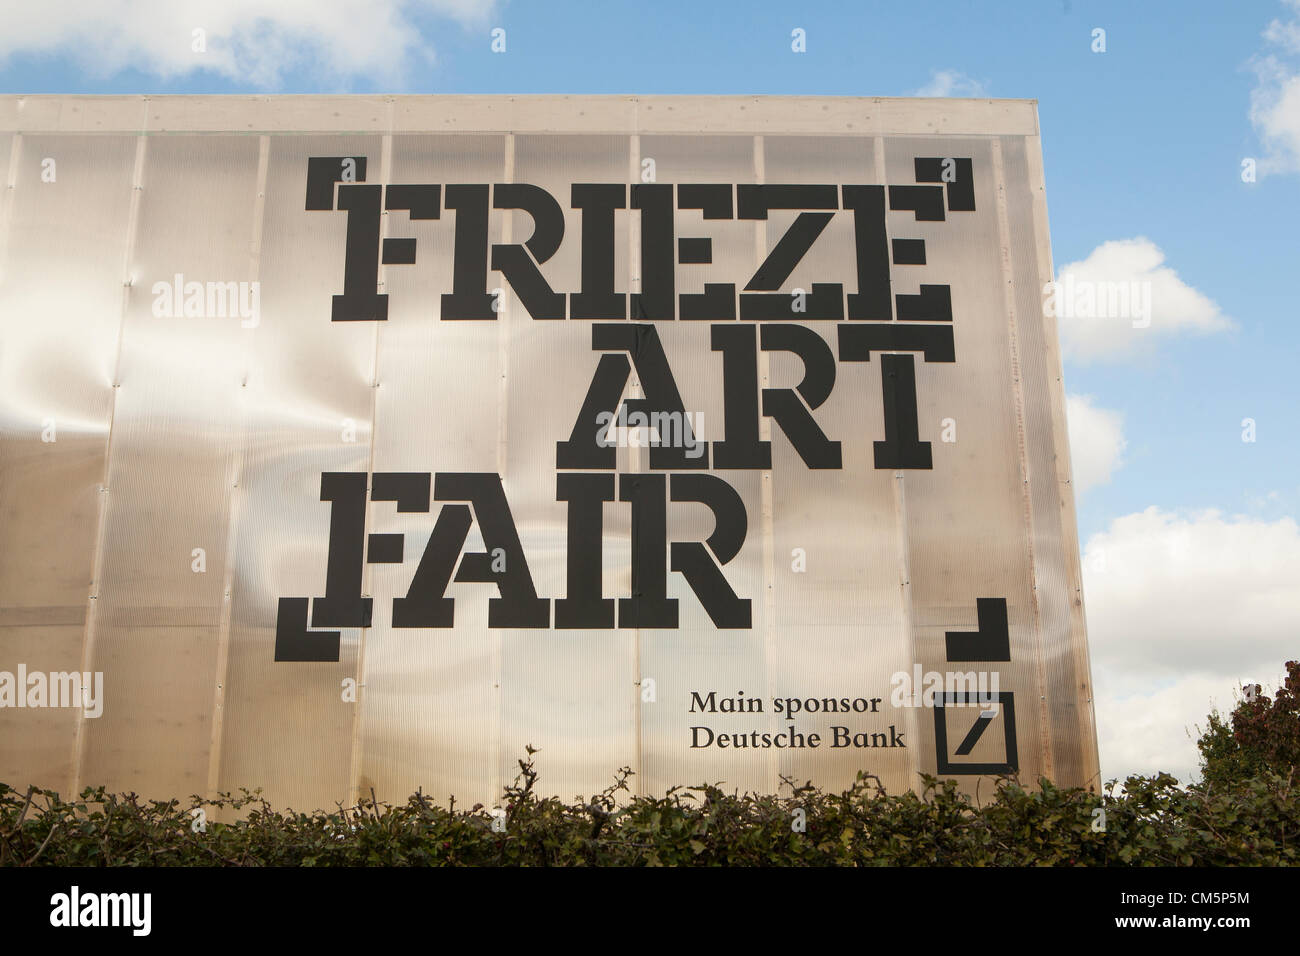 London, UK. 10th October 2012. The 2012 Frieze Art Fair opened today in Regent's Park, London, England. Stock Photo